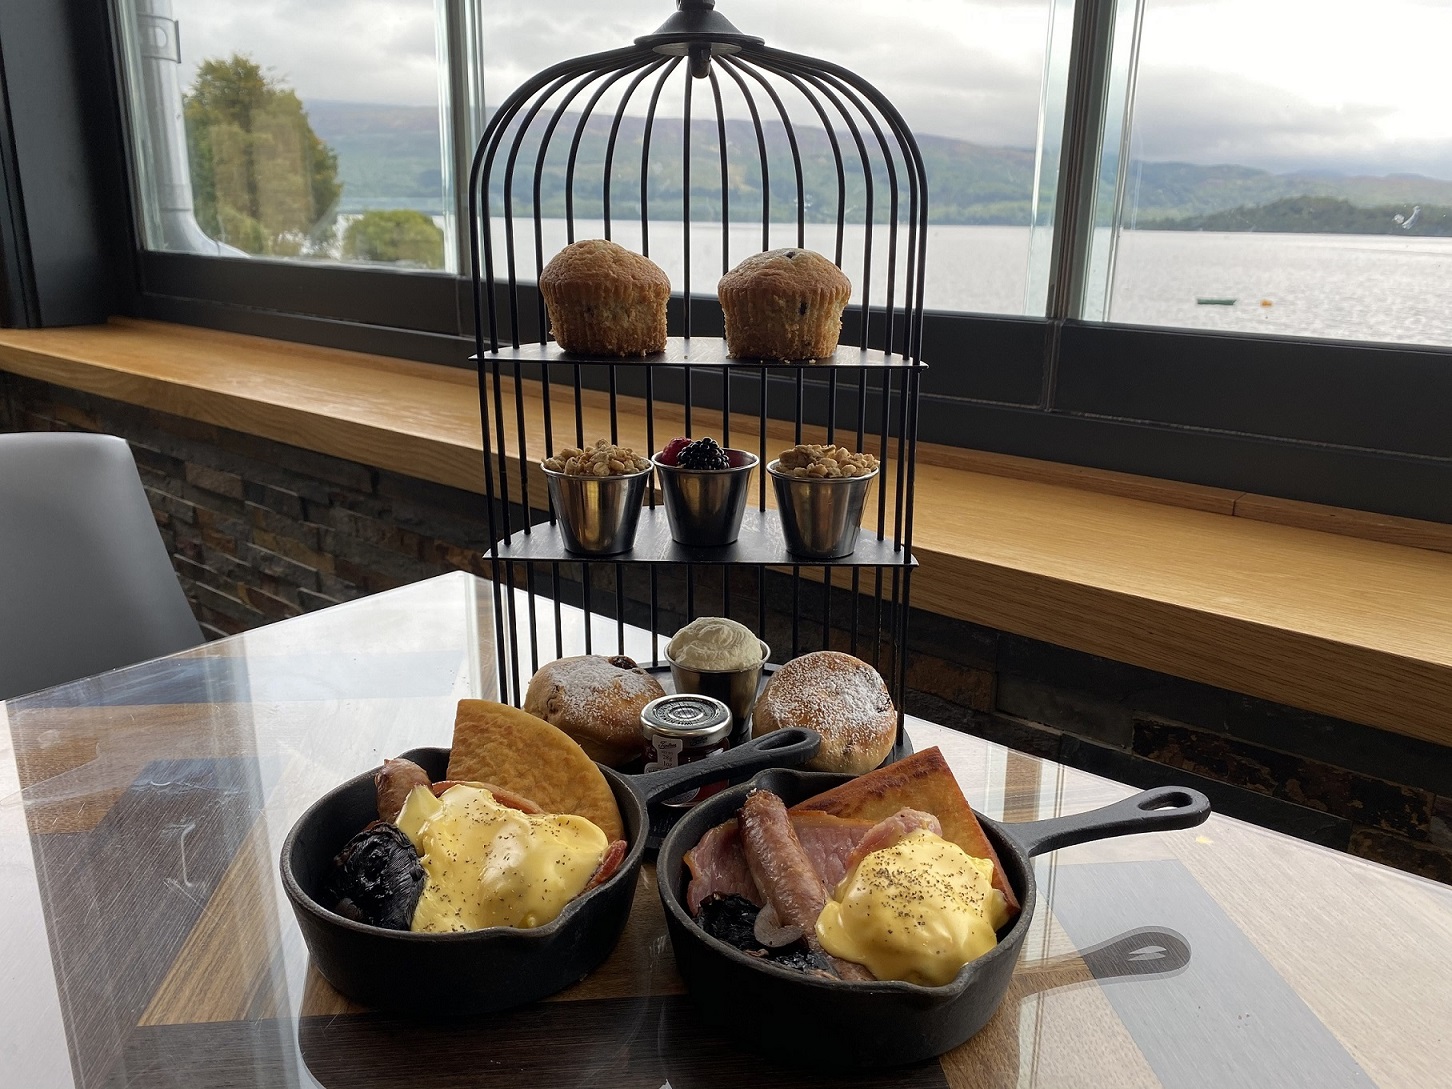 Lochside Morning Tea & Thermal Suite for 2 persons